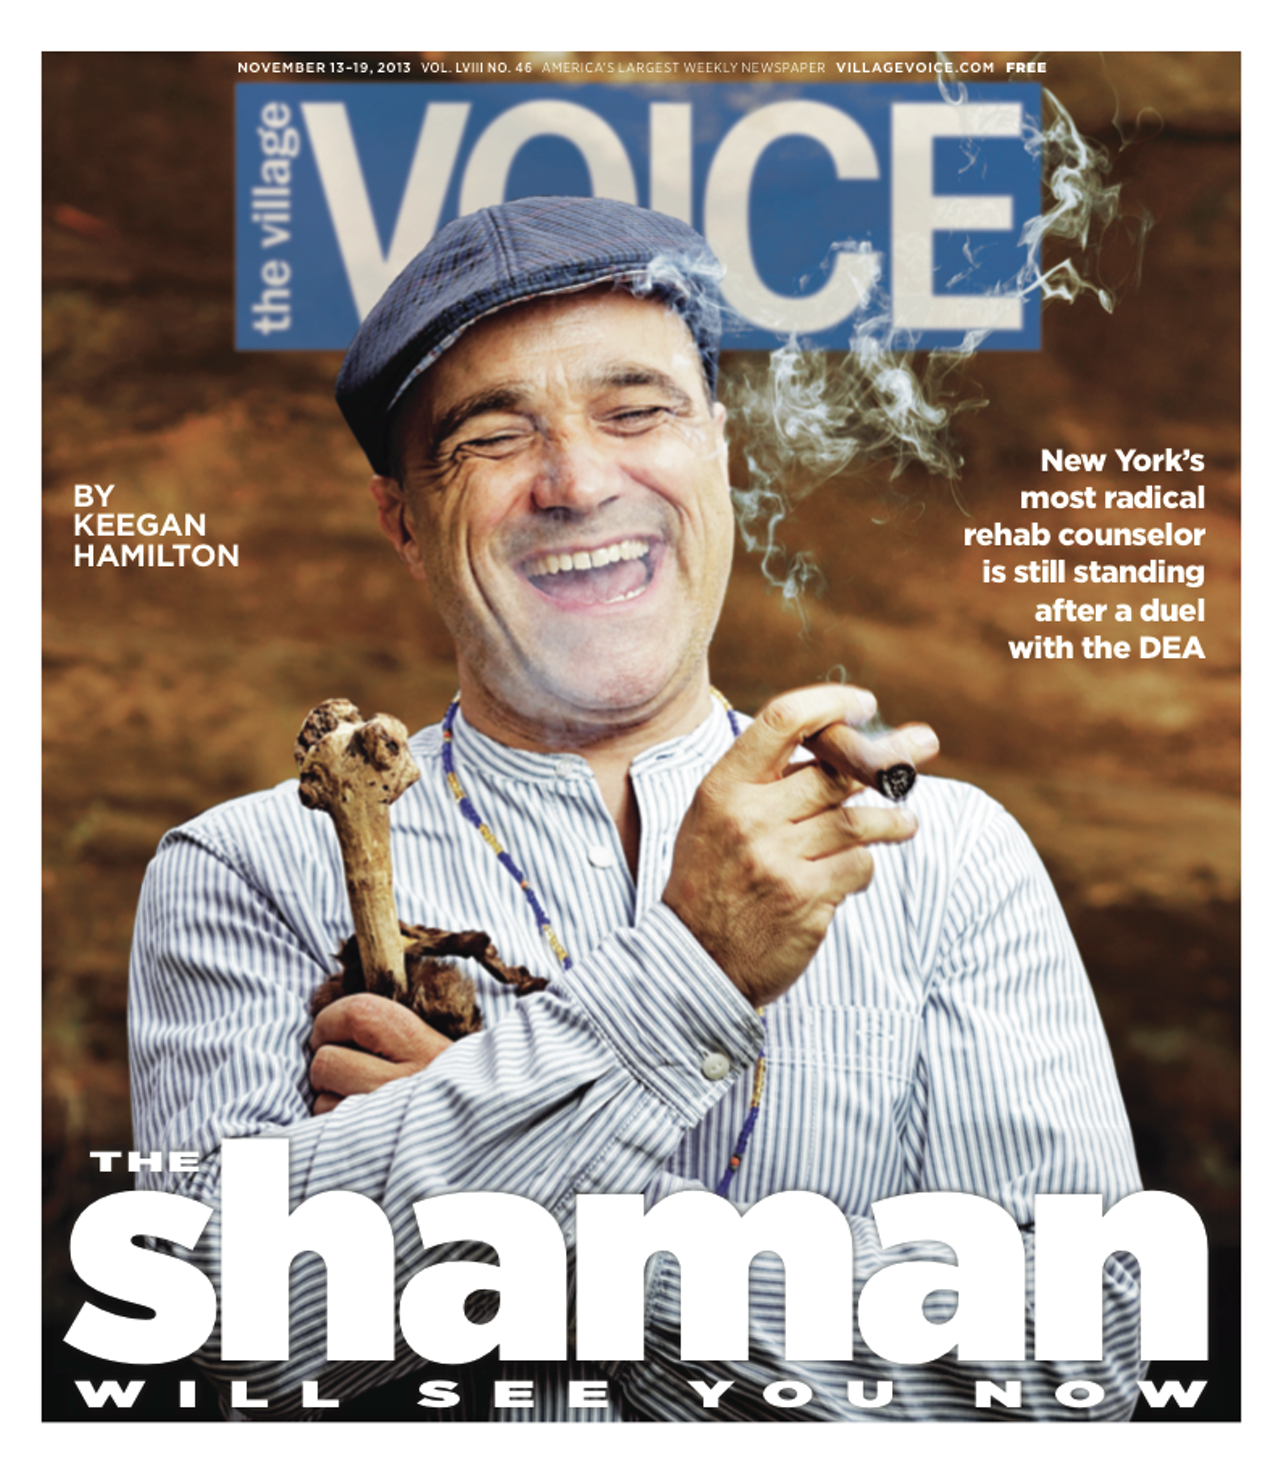 "The Shaman Will See You Now," by Keegan Hamilton in the Village Voice.